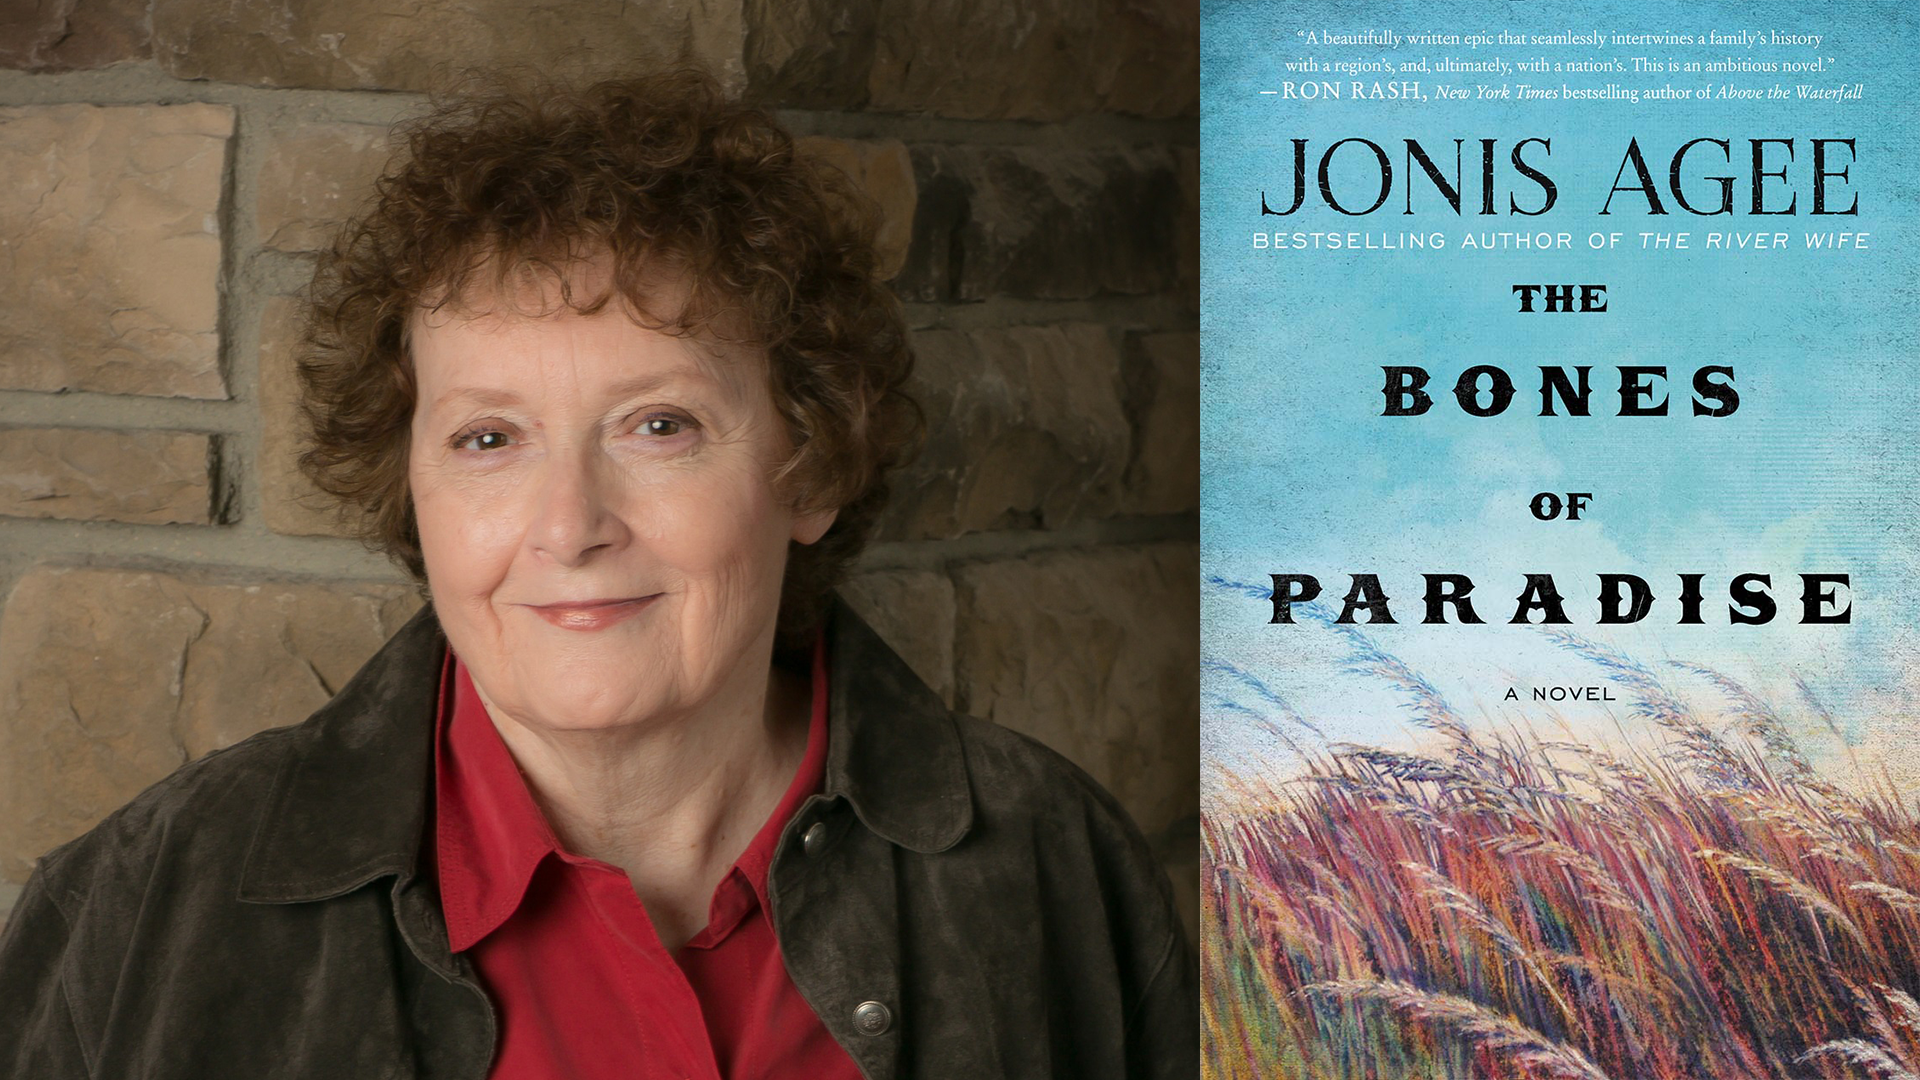 Jonis Agee and the cover of THE BONES OF PARADISE